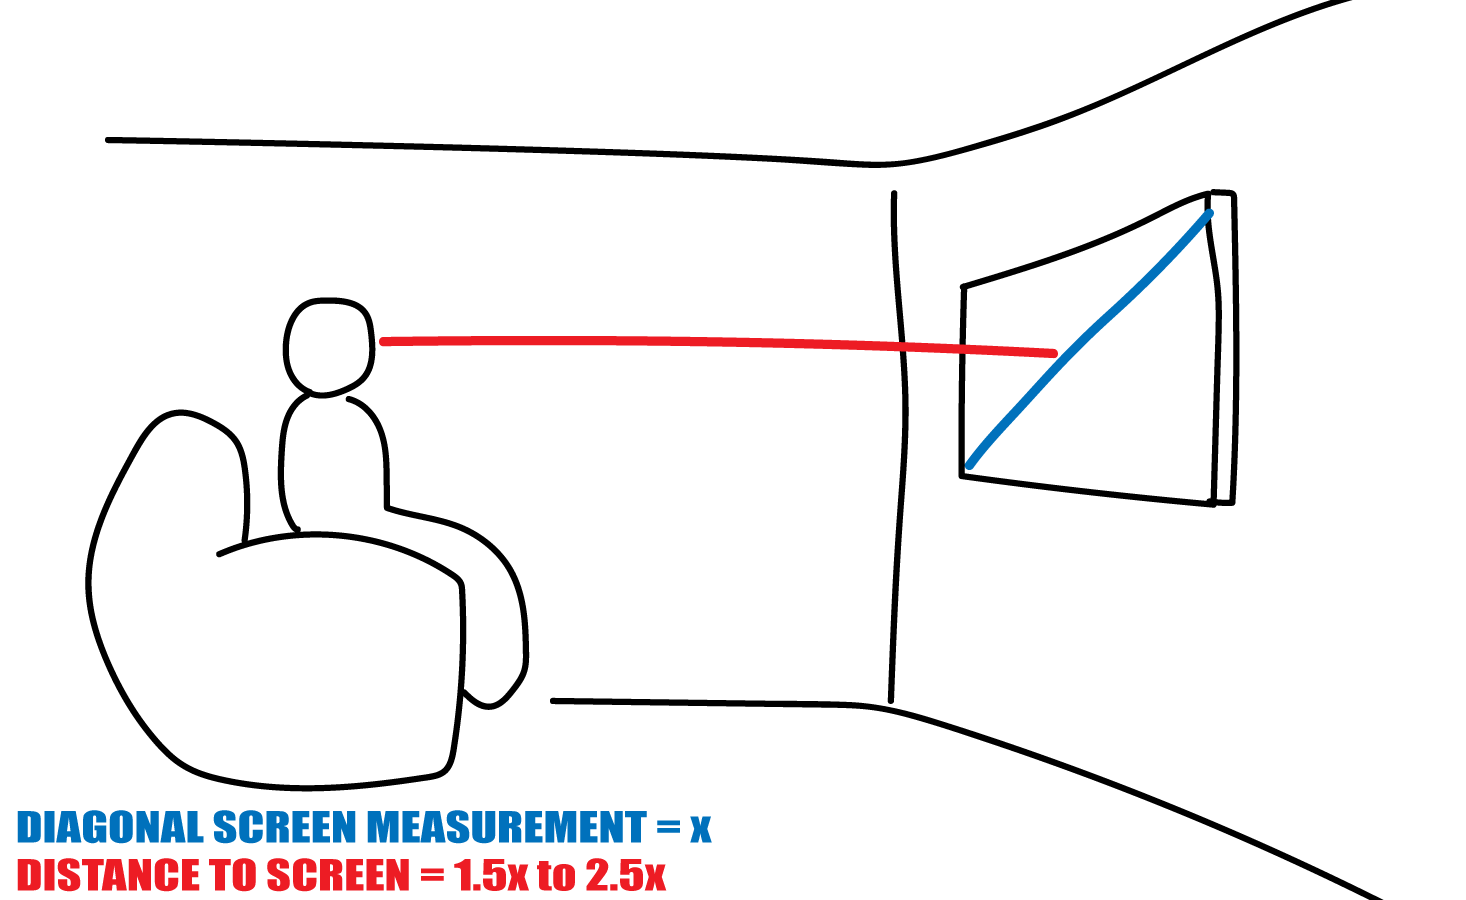 what is the recommended seating distance from the television for home theater setups